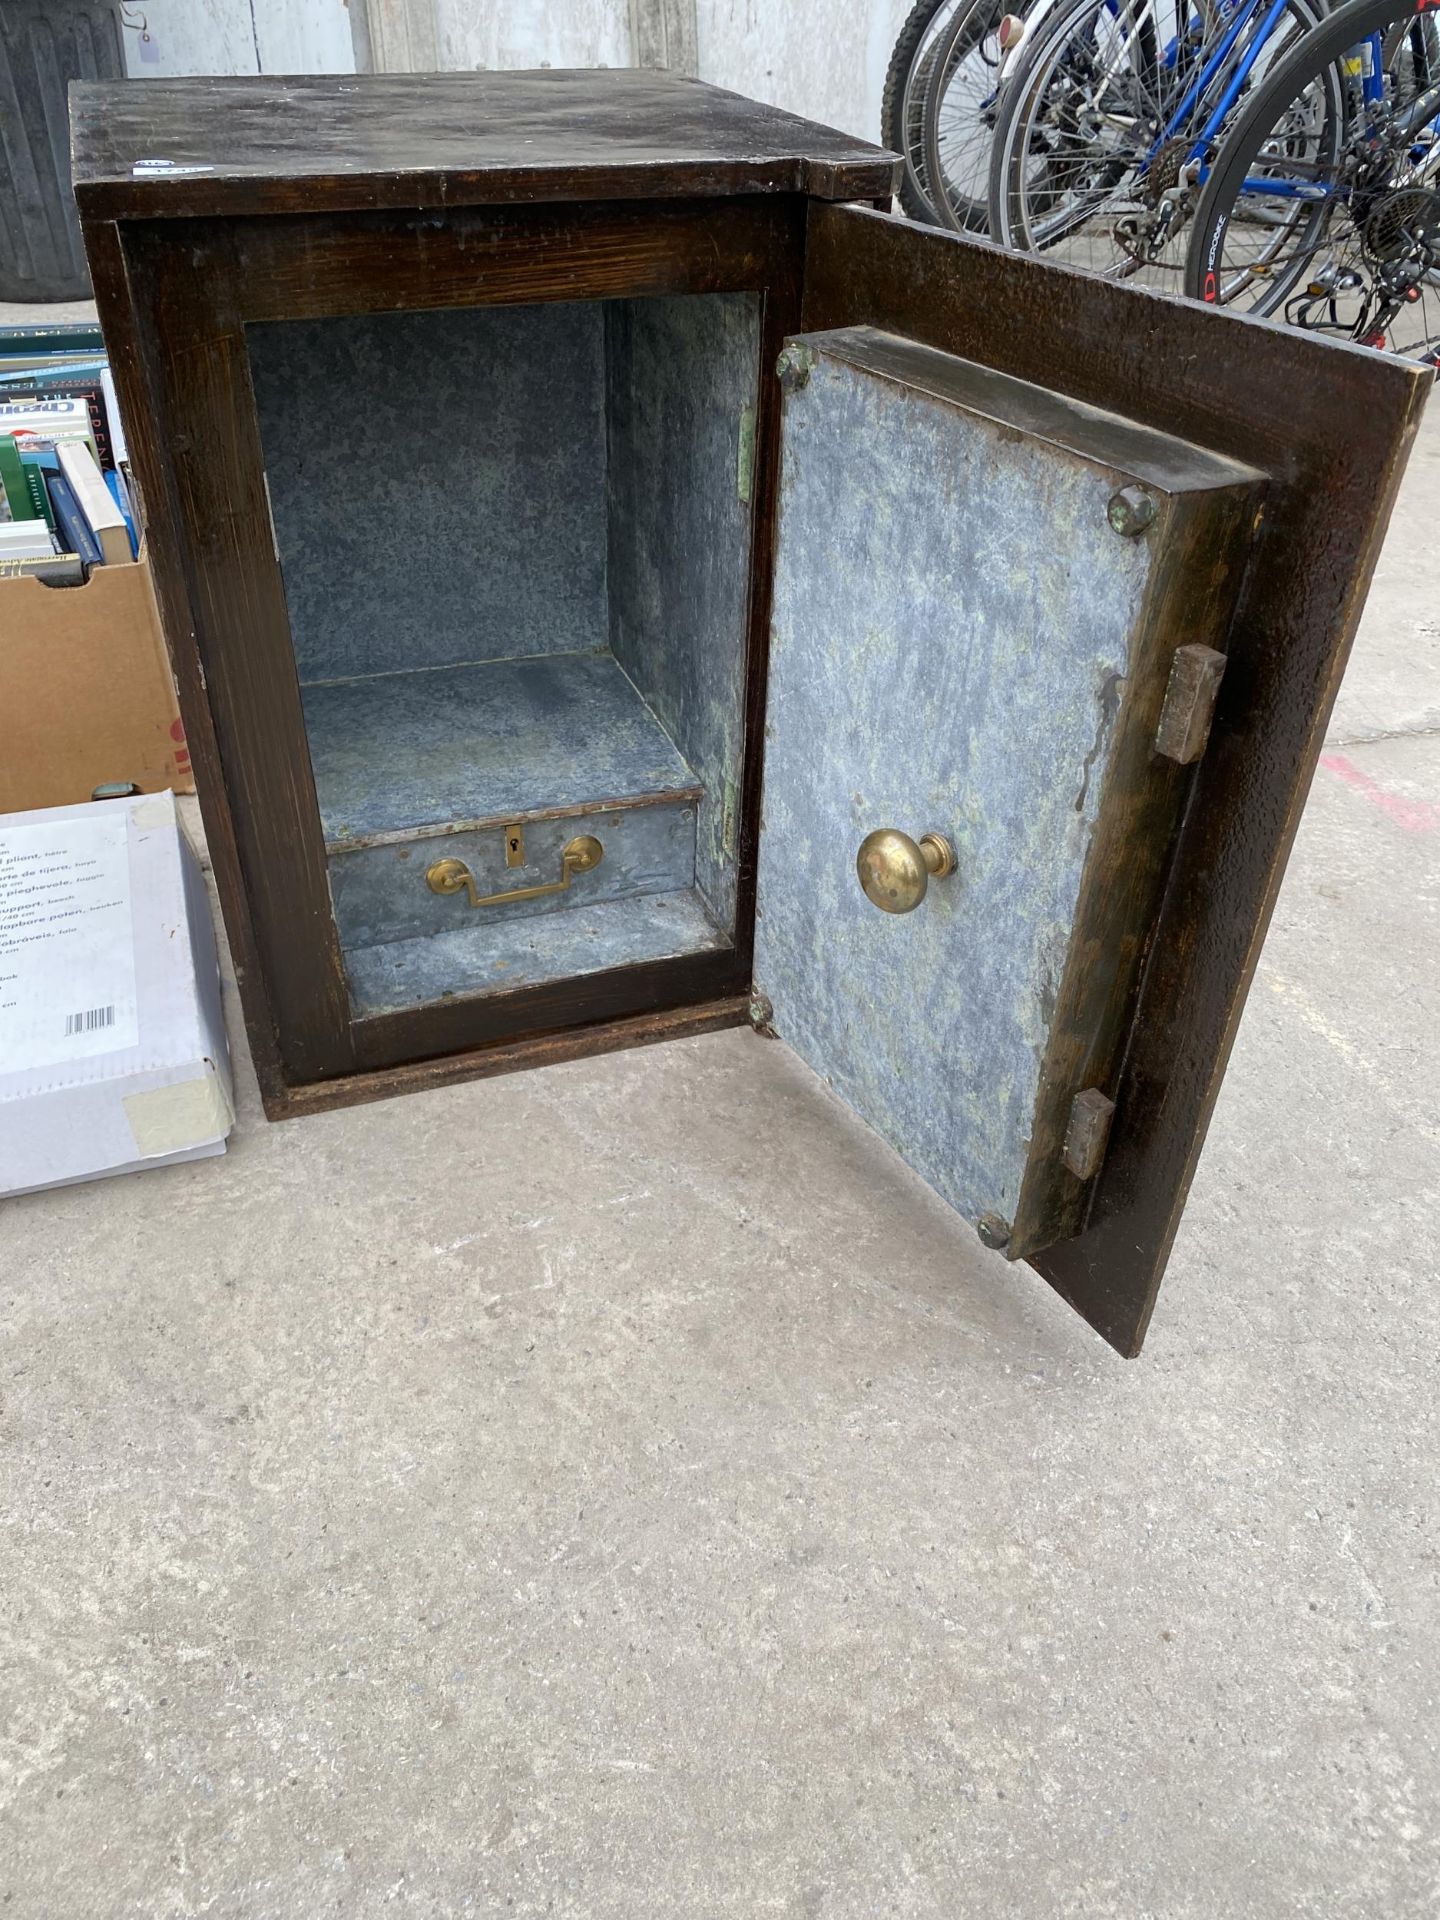 A VINTAGE HEAVY CAST IRON FIRE SAFE WITH BRASS FITTINGS (UNLOCKED BUT NO KEY PRESENT) - Image 4 of 10